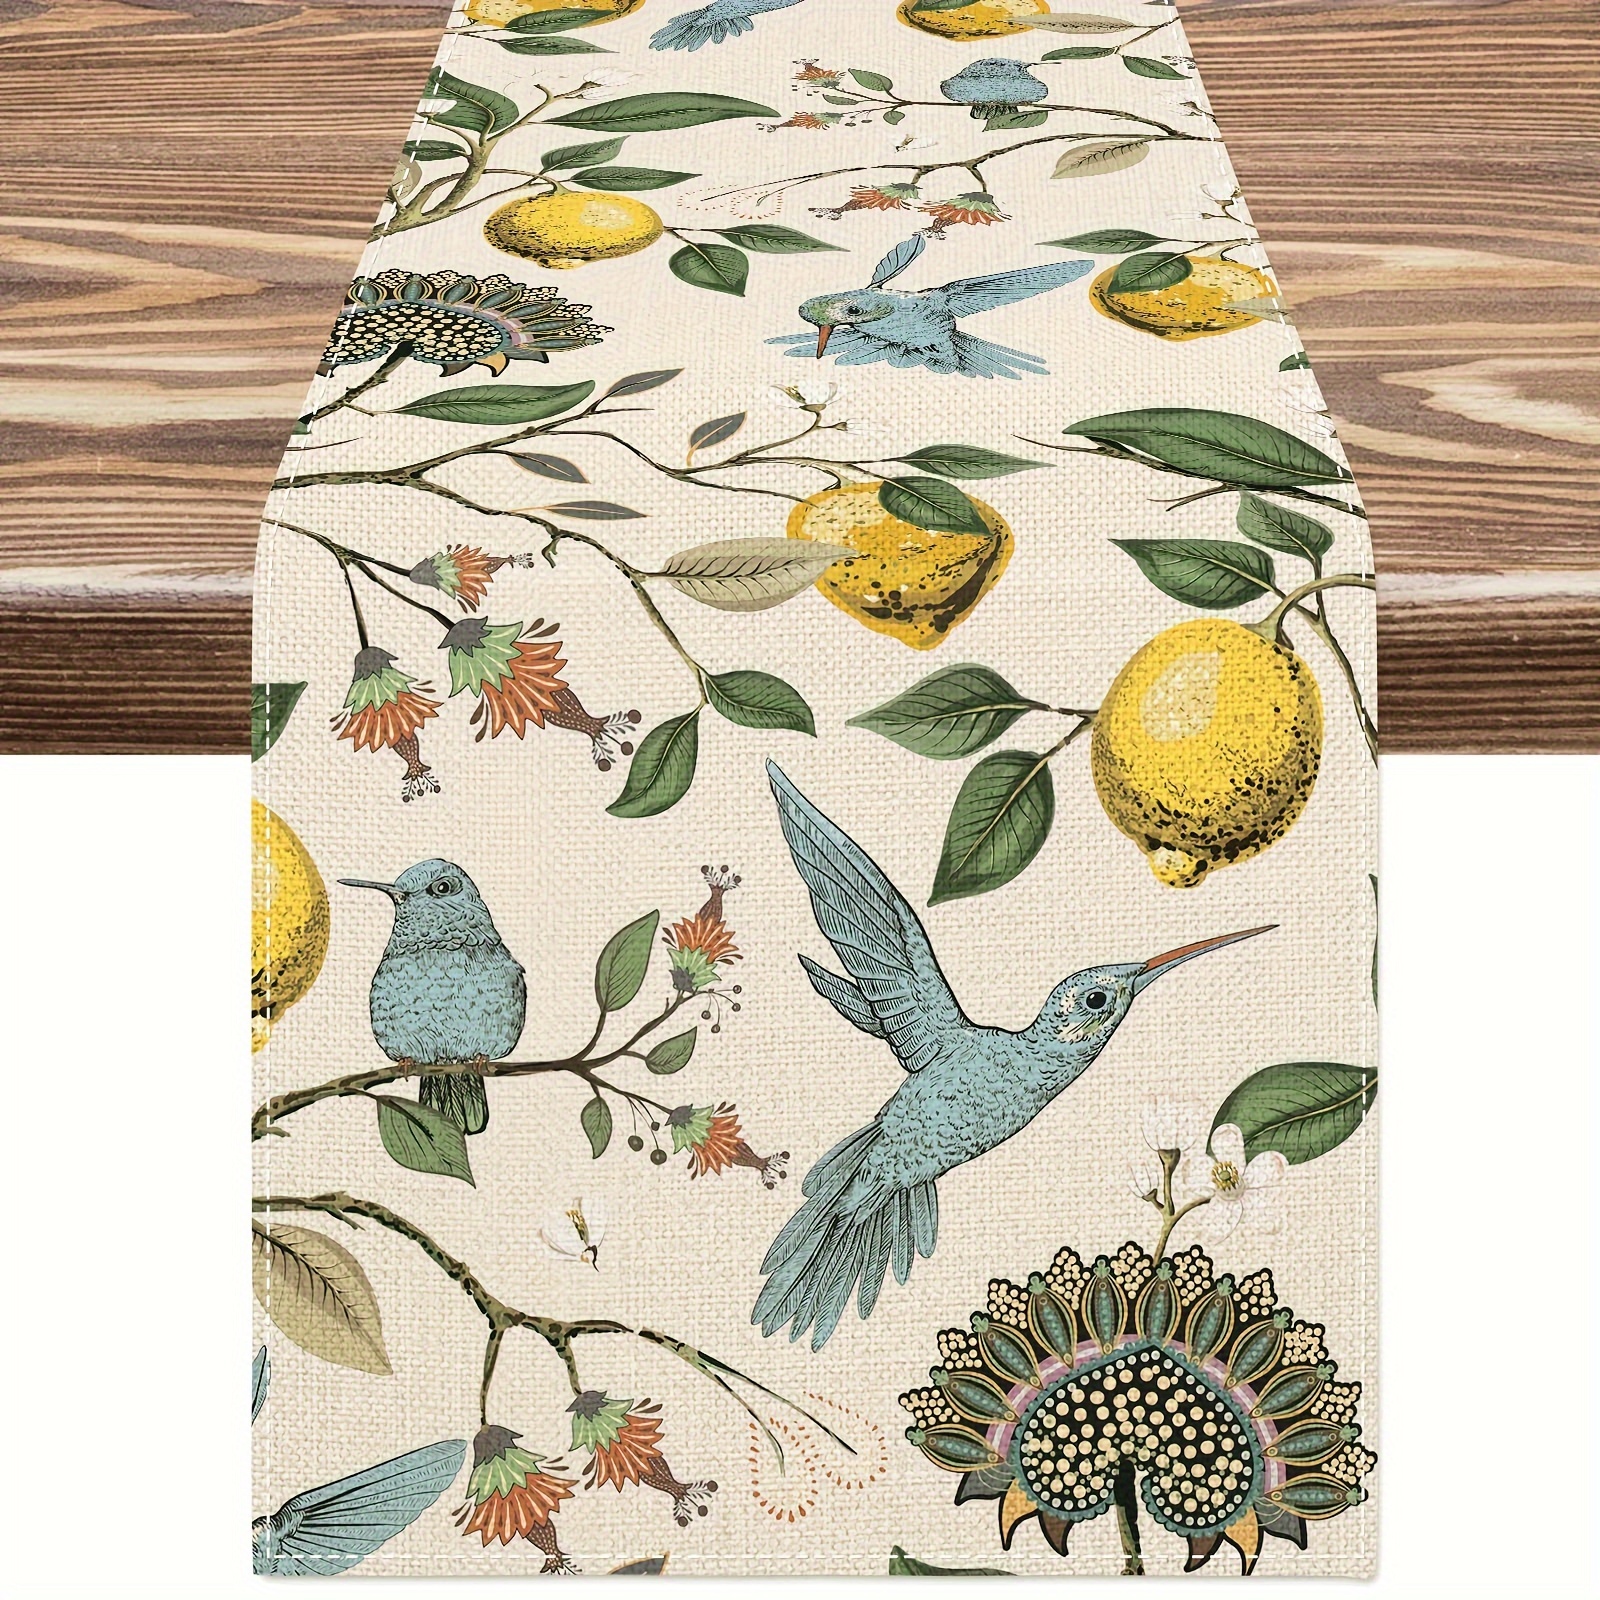 

1pc, Lemon Table Runner, Summer Blue Bird Lemon Tree Kitchen Dining Table Decoration Retro Decorative Seasonal Table Cover For Indoor Outdoor Home Party Supplies Decor 13x72 Inch